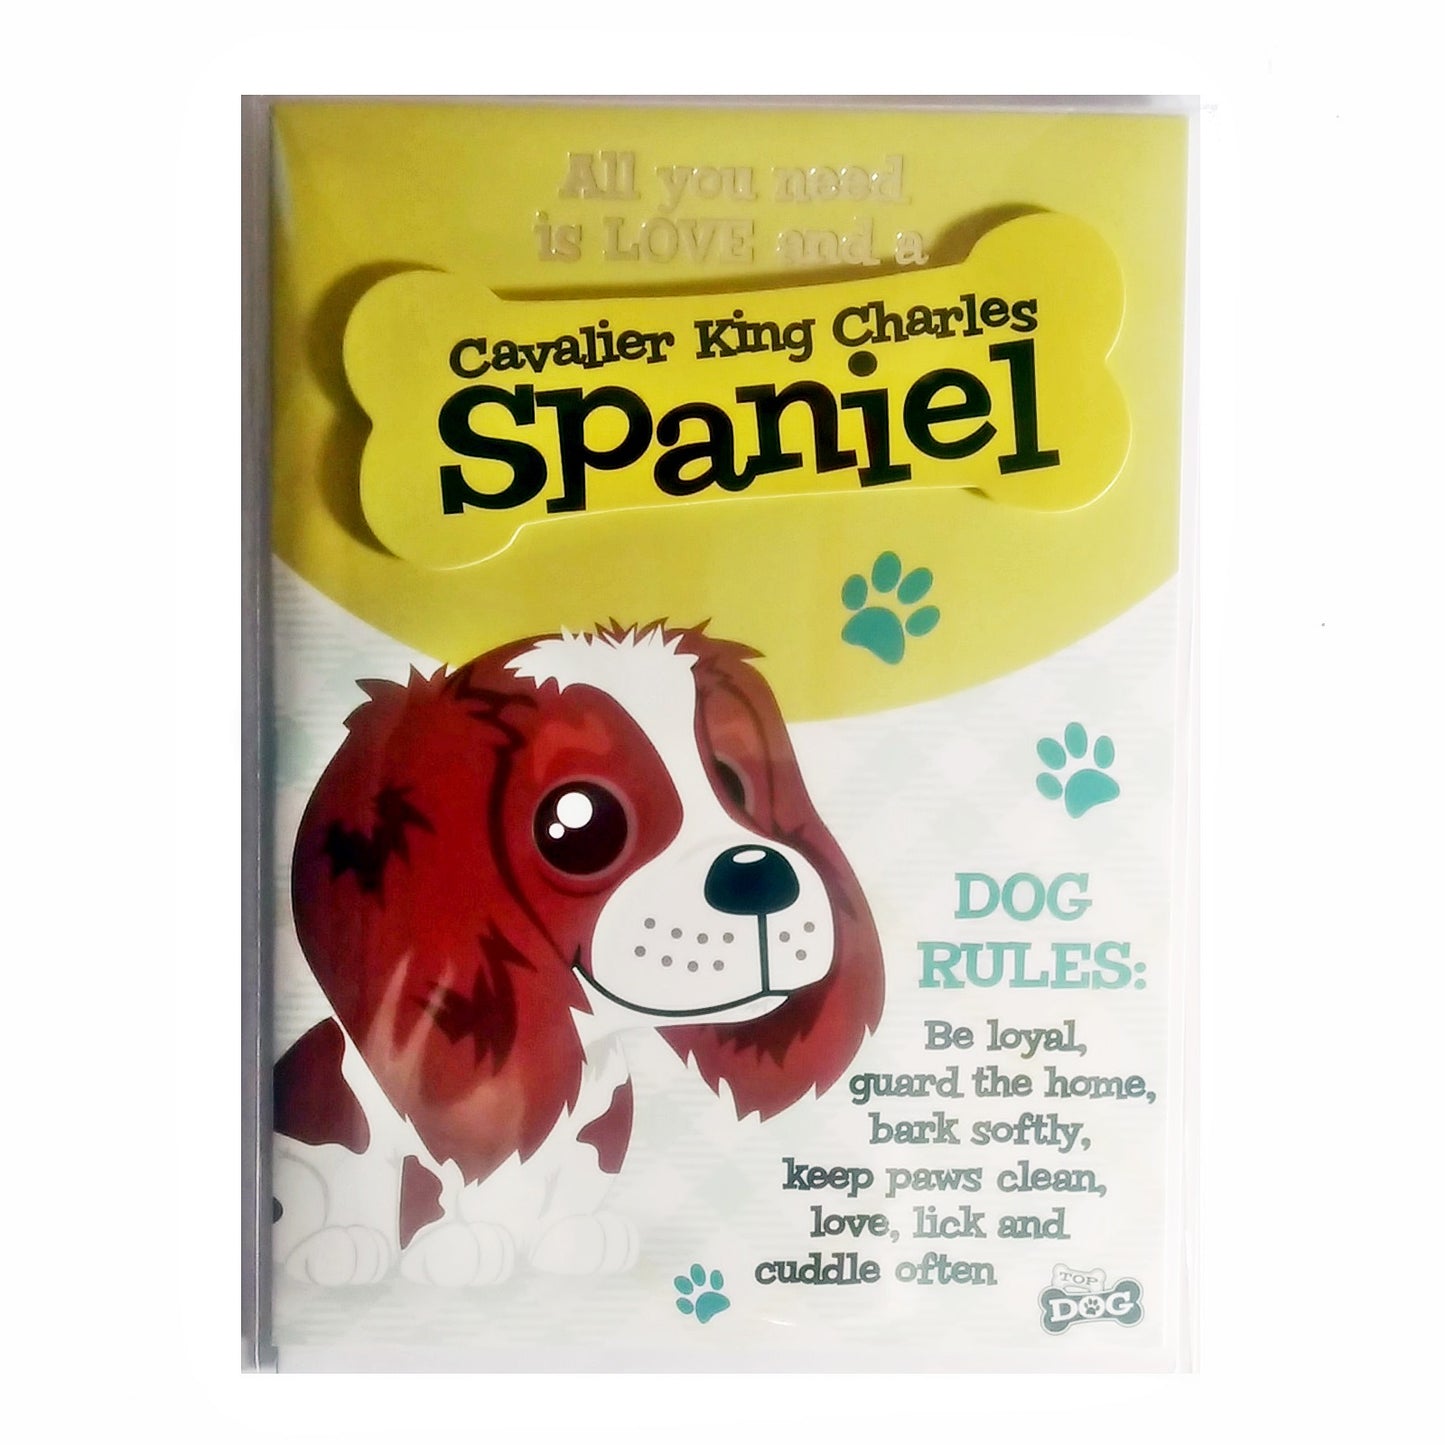 Wags & Whiskers Dog Greeting Card "Cavalier King Charles Spaniel" by Paper Island